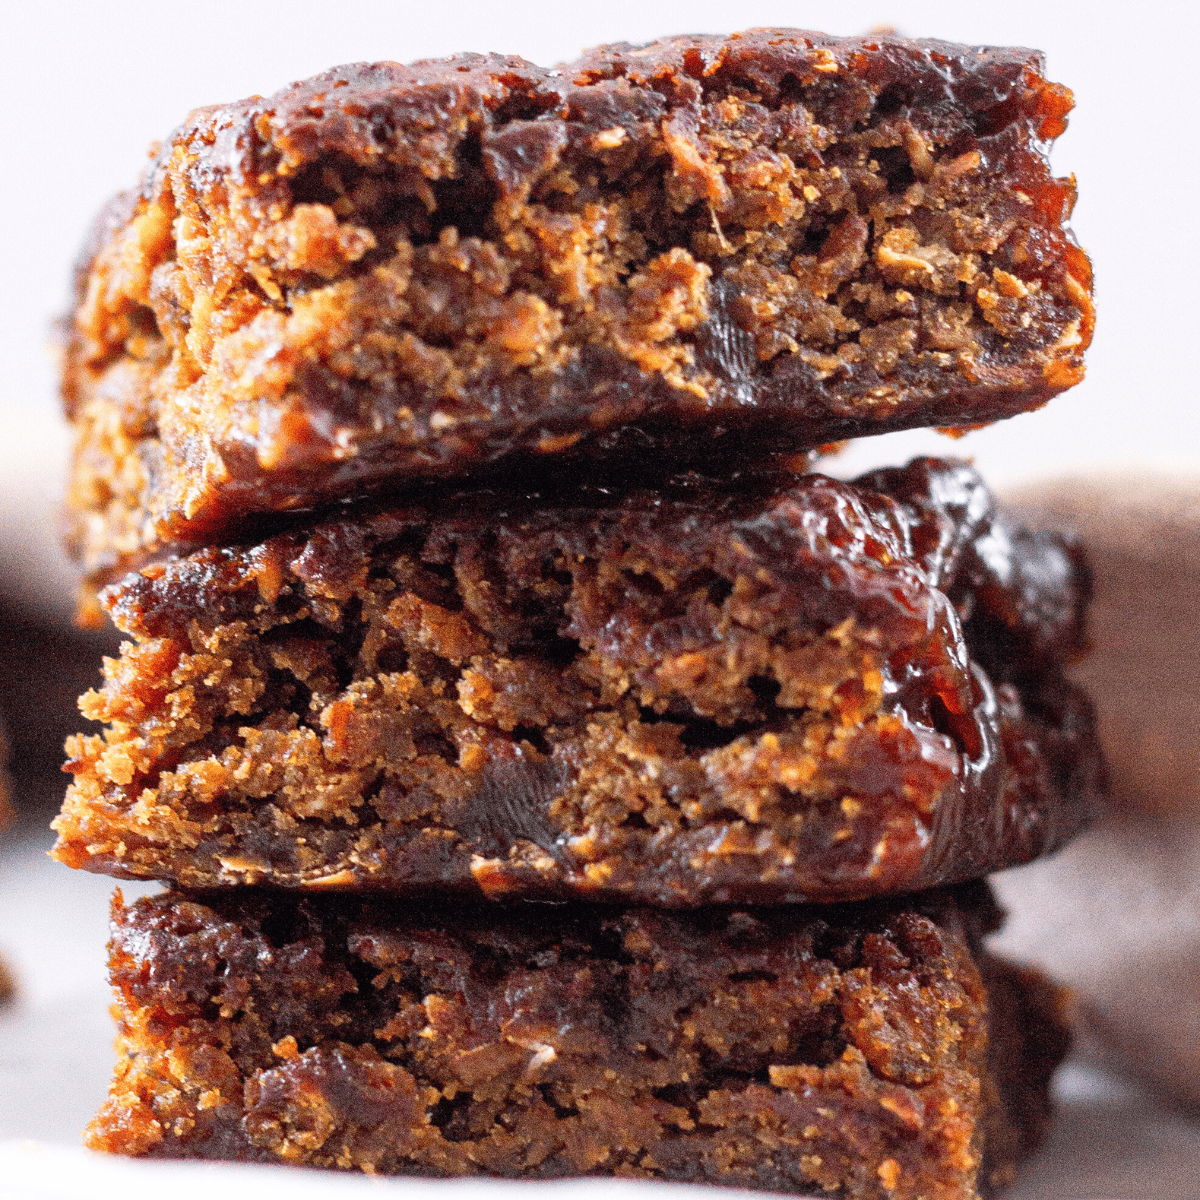 A stack of parkin.